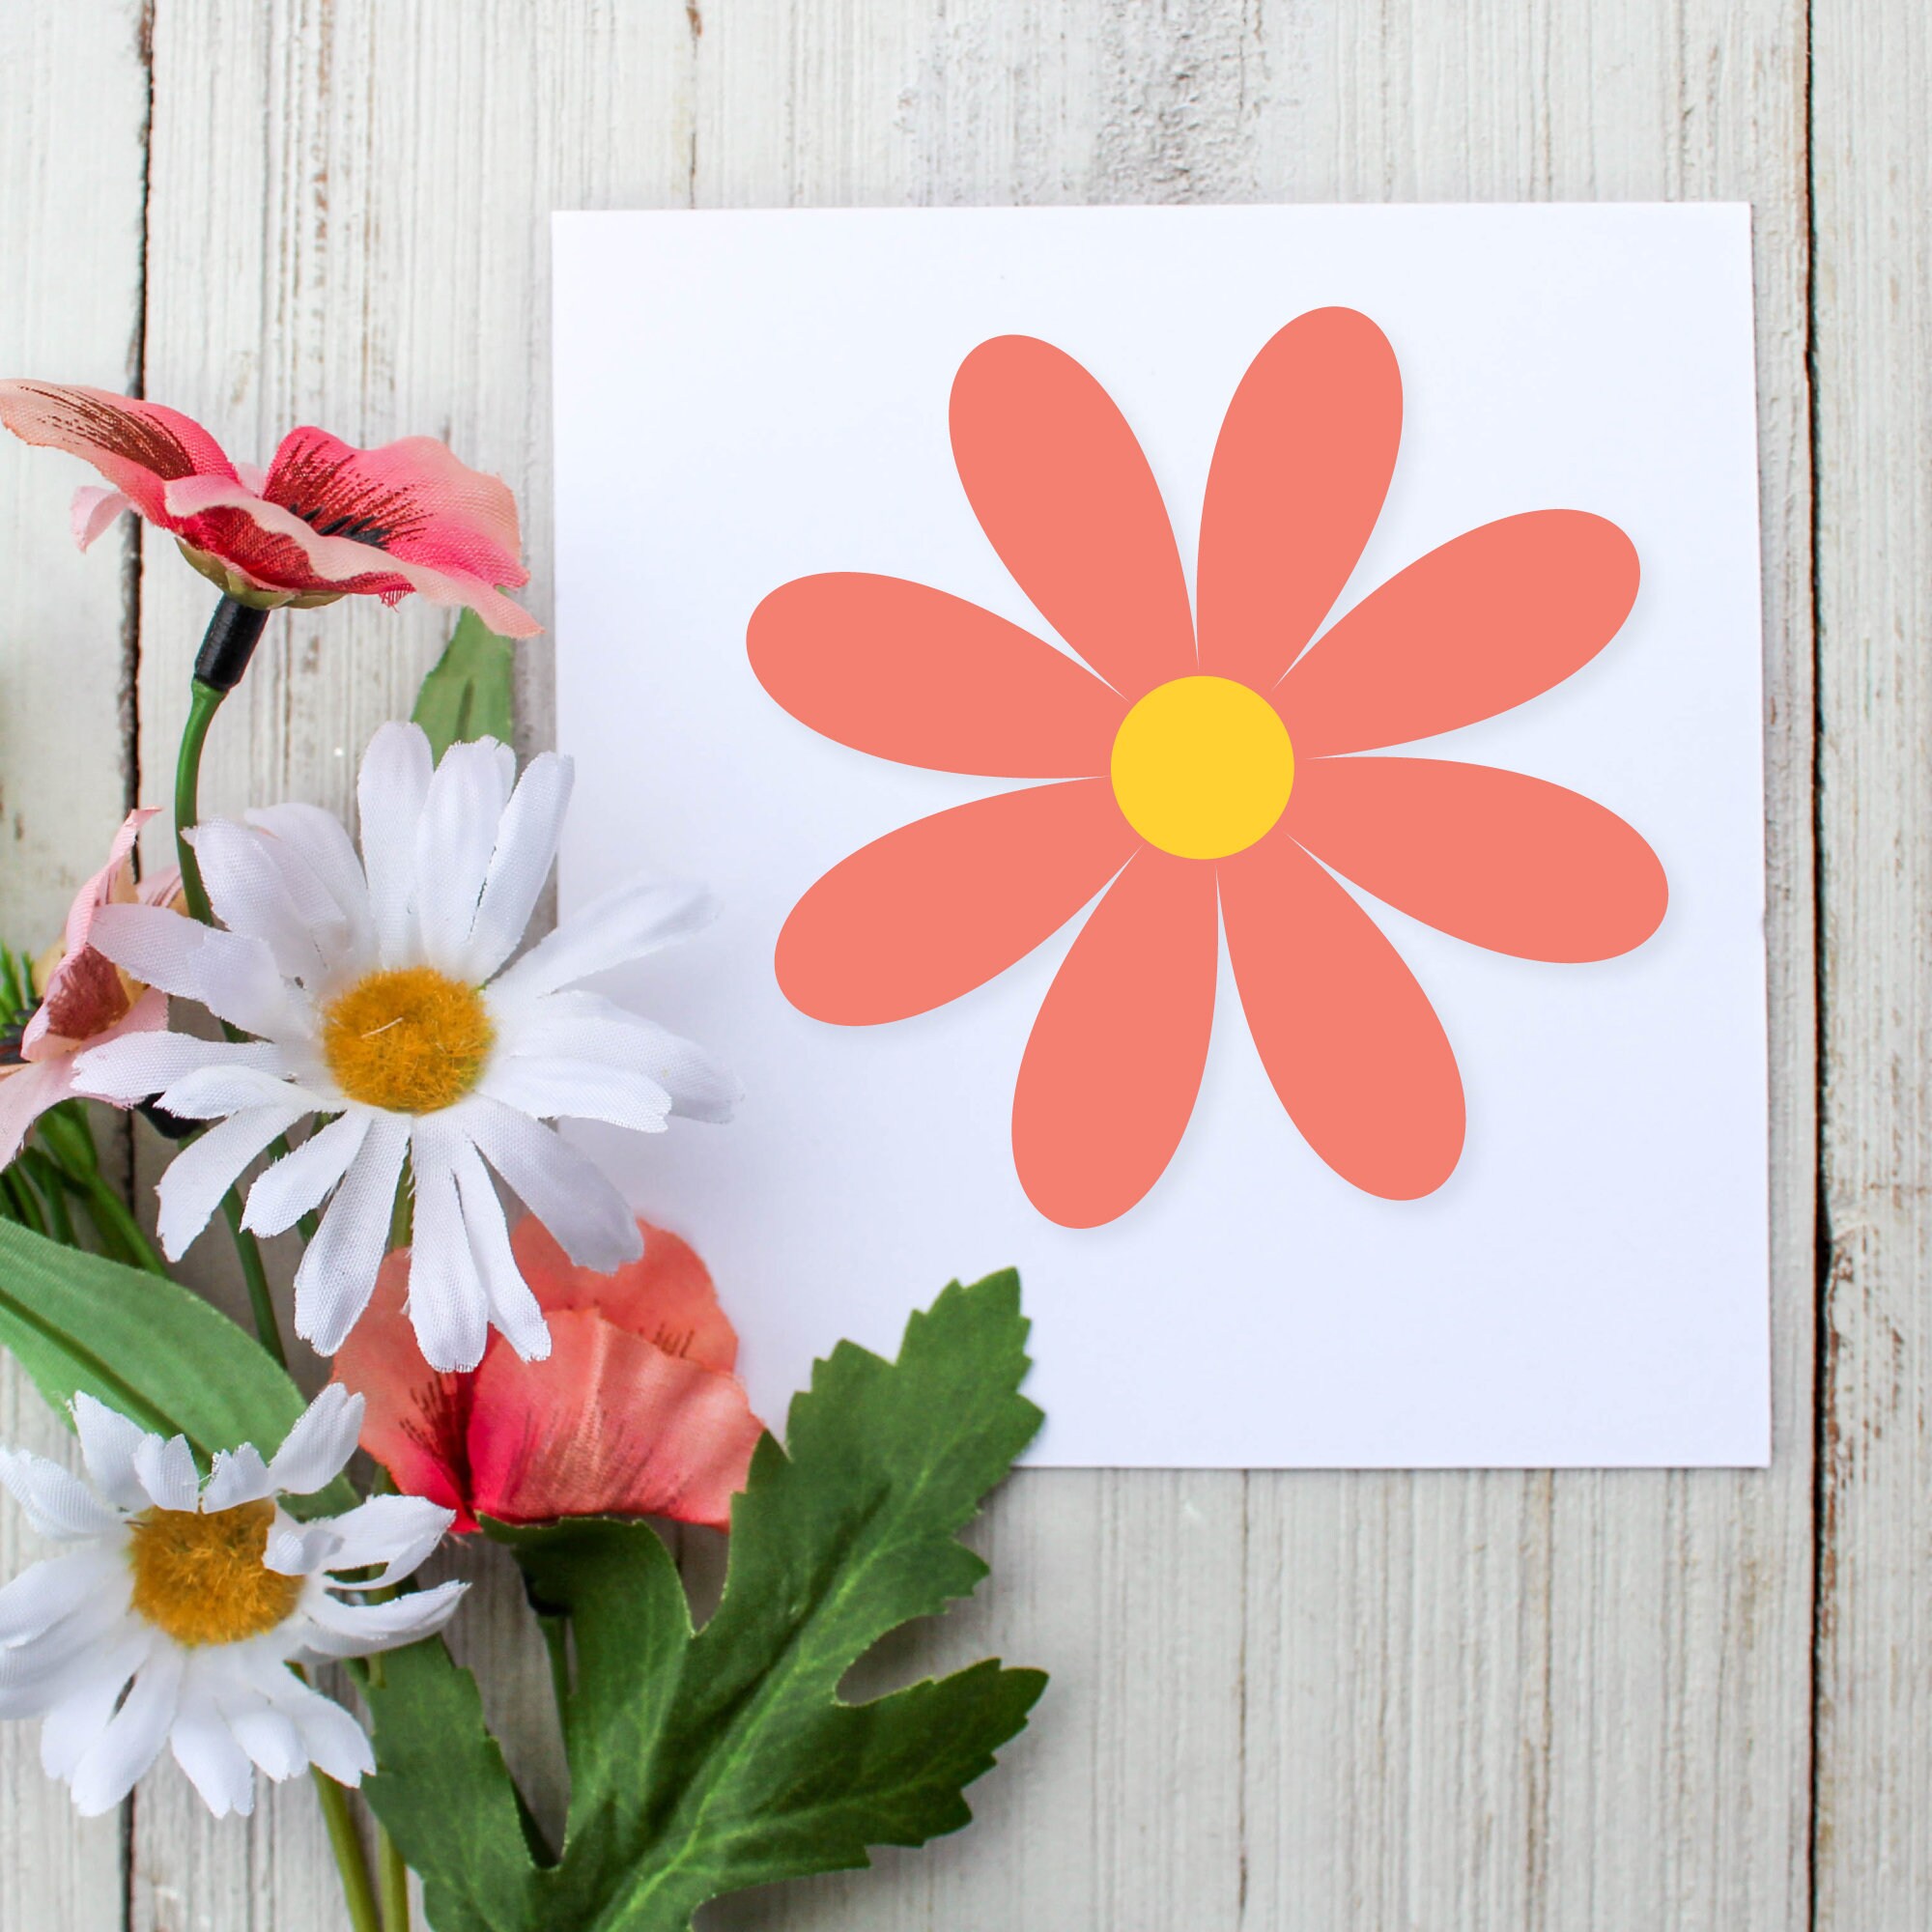 Hand Holding 3 Daisy Flowers, High Quality Vinyl Stickers